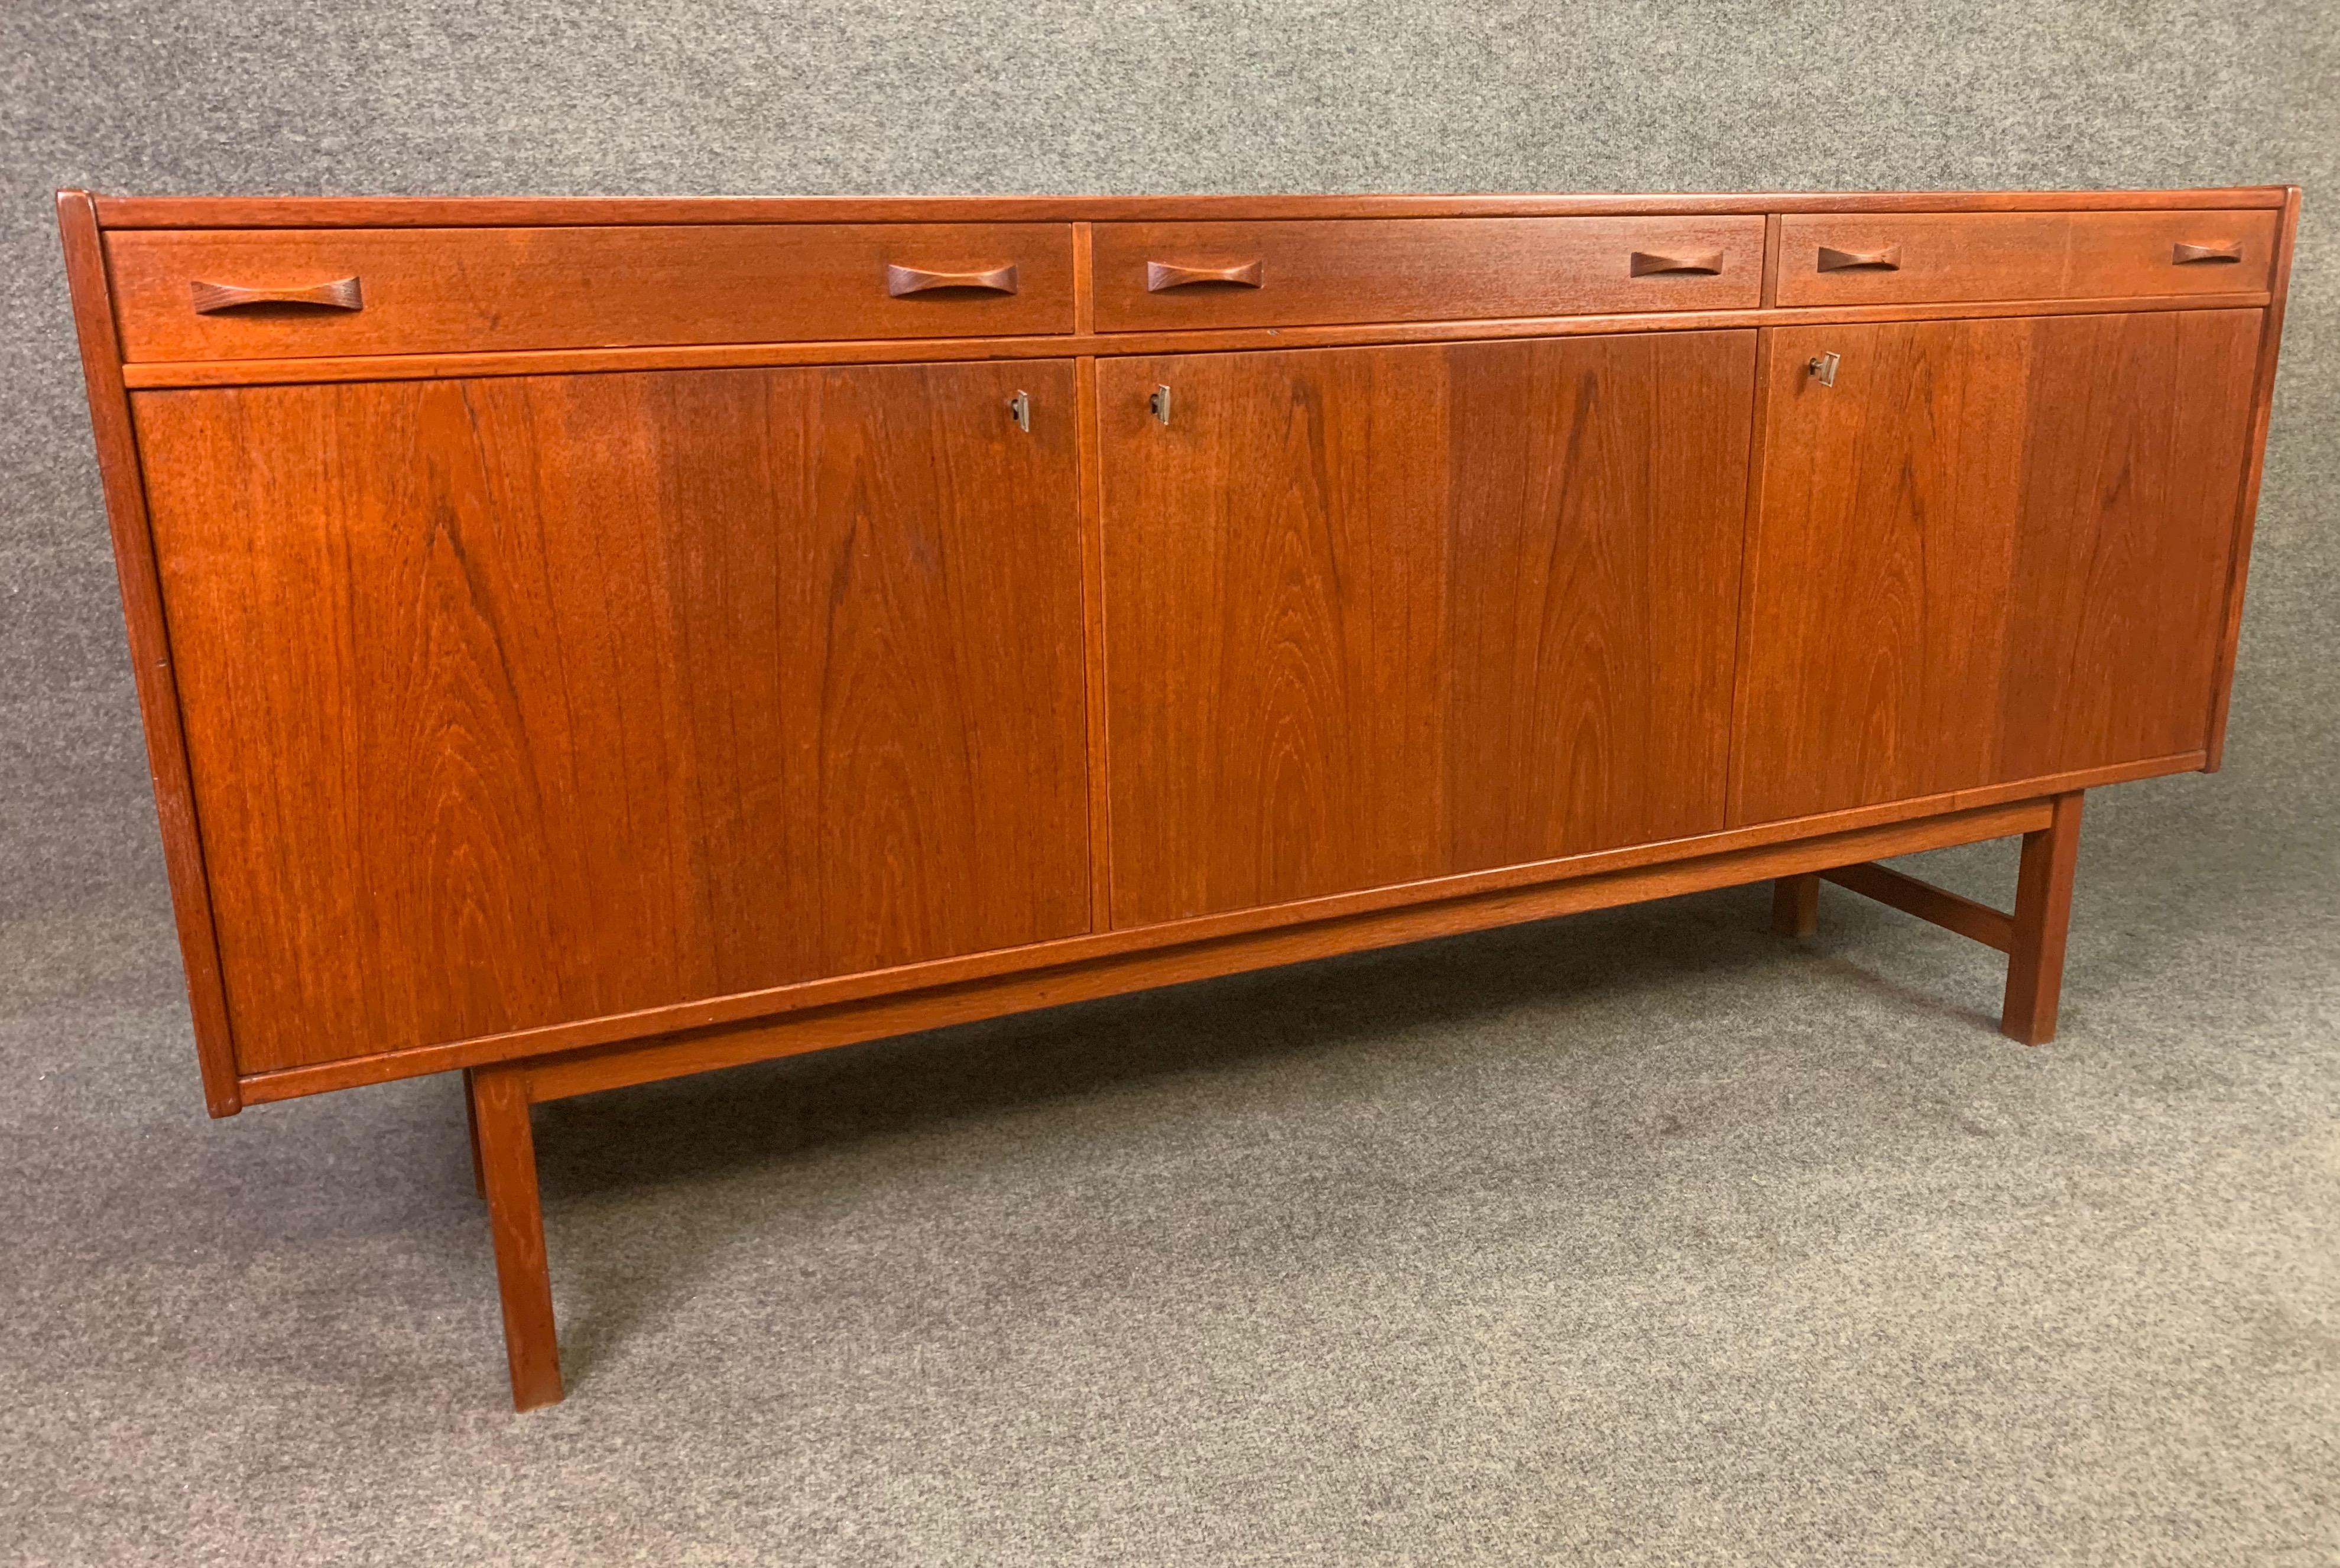 Here is a beautiful Scandinavian Modern sideboard in teak wood designed by Tage Olofsson and manufactured by Ulferts Möbler in Sweden in the 1960s.
This credenza, recently imported from Denmark to California, features vibrant wood grain details, a